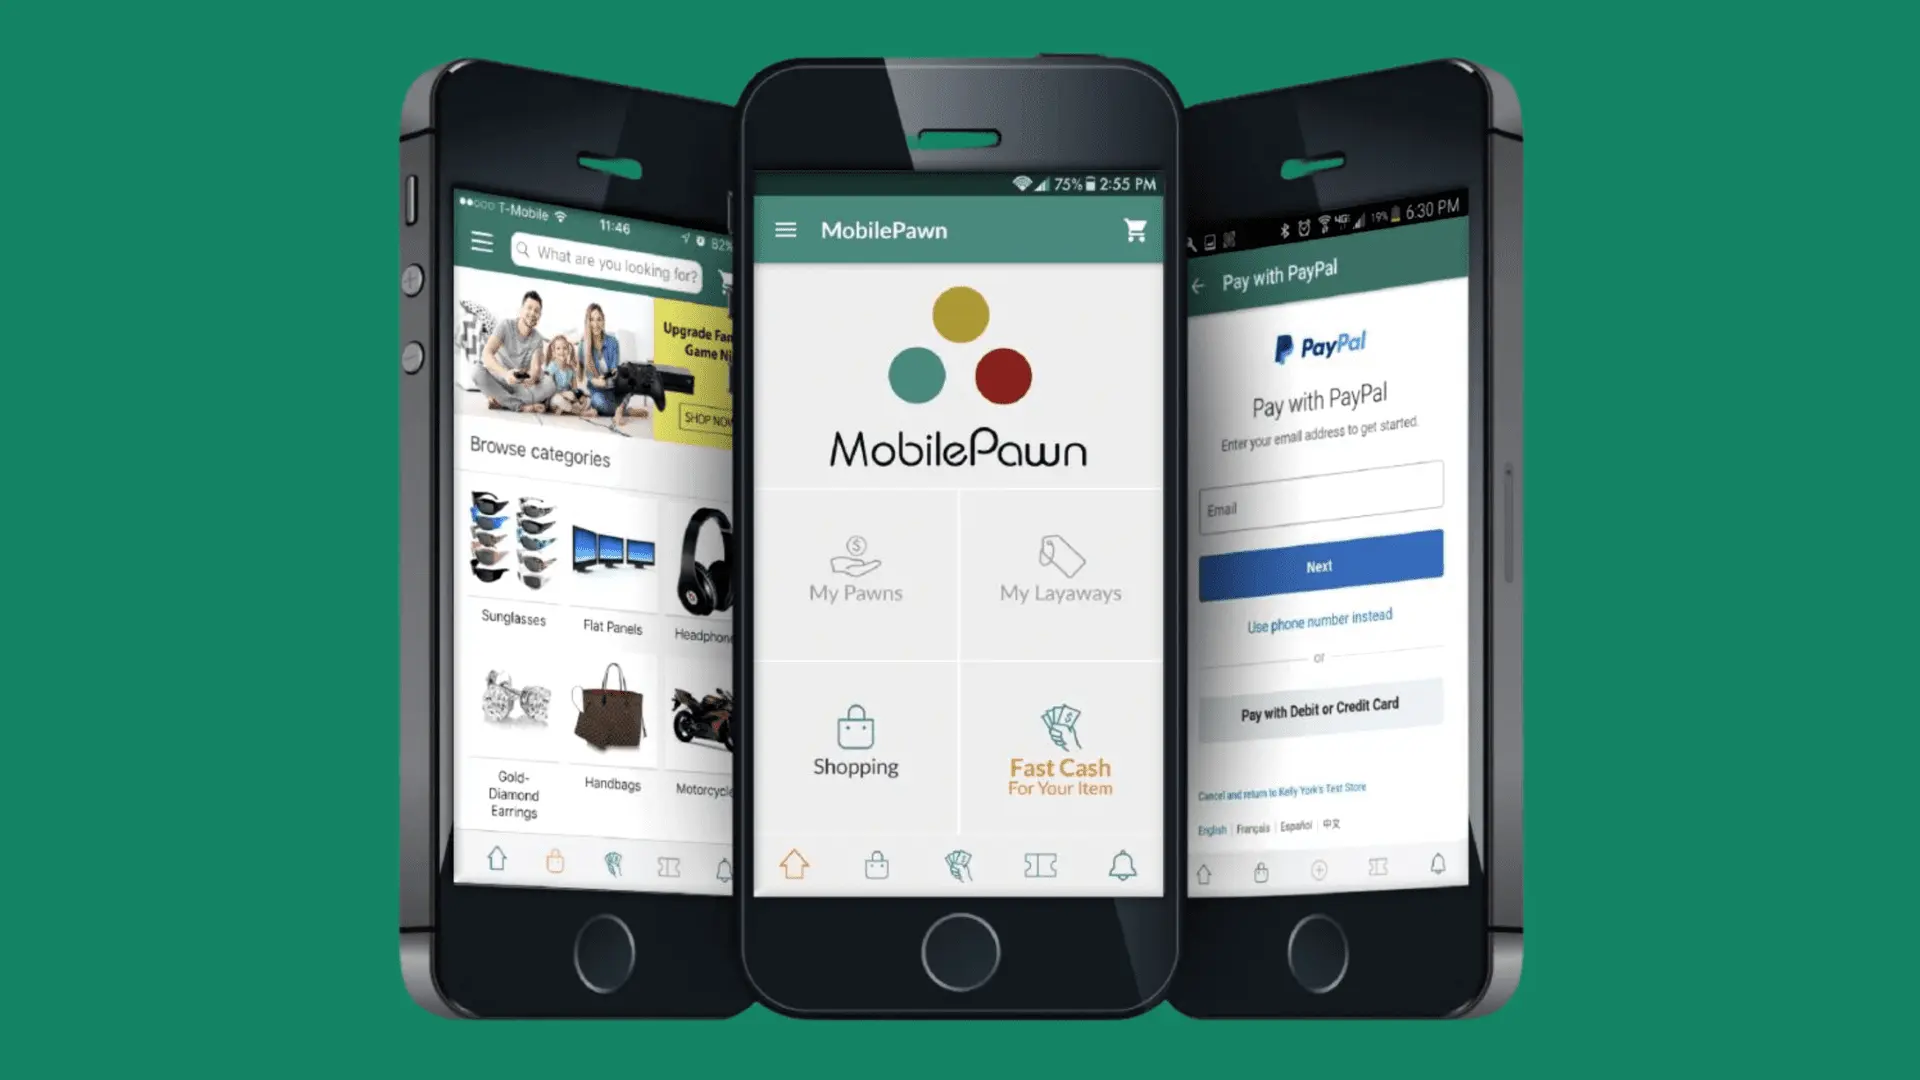 image of MobilePawn app functions like shopping online, requesting new loans, paying on layaways and extending loan dates